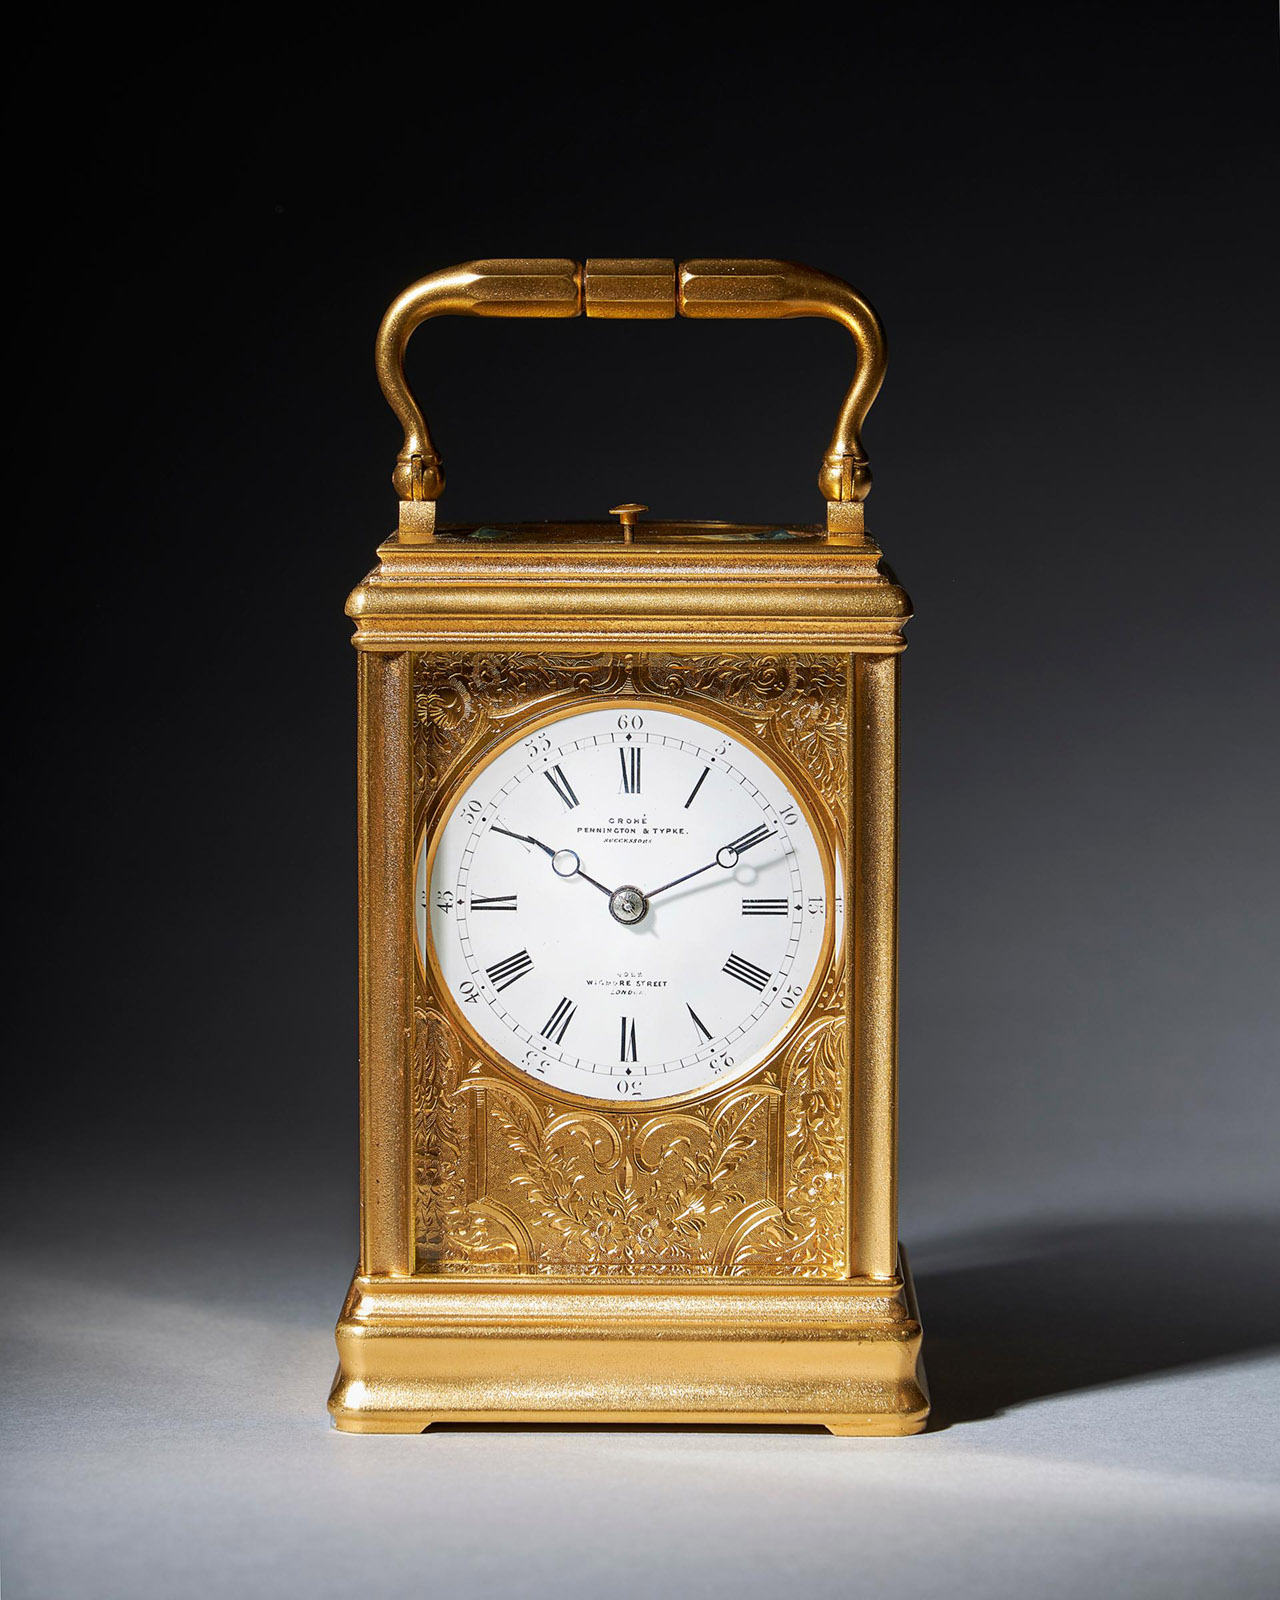 Repeating Gilt-Brass Carriage Clock by the Famous Drocourt